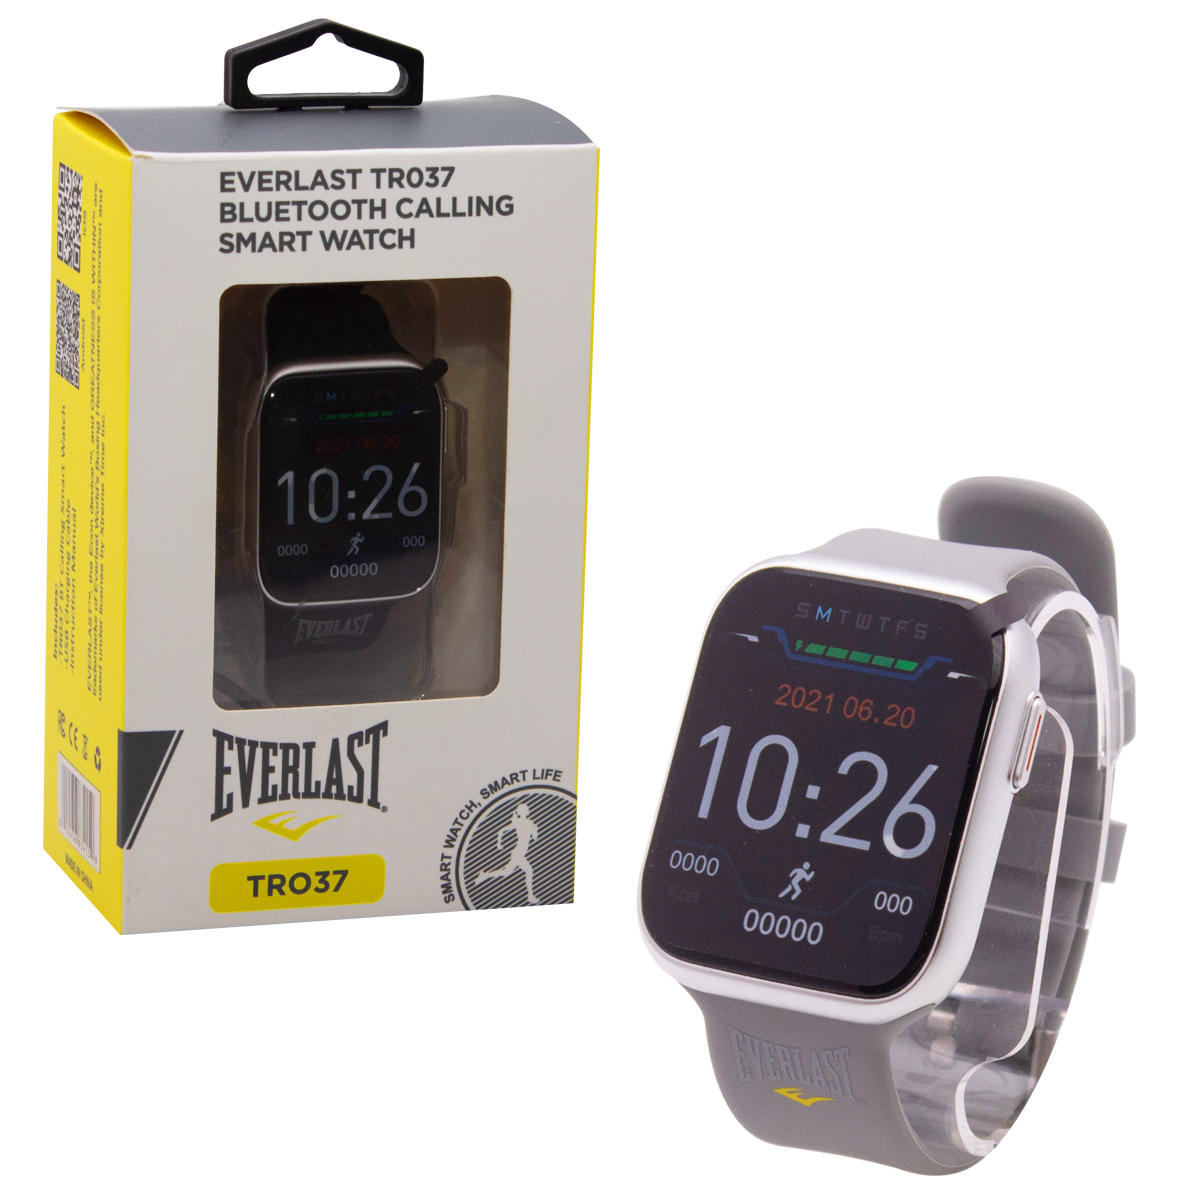 Photos - Other for Mobile Everlast ® TR037 Bluetooth Calling Smartwatch - Grey EVWTR037GY 